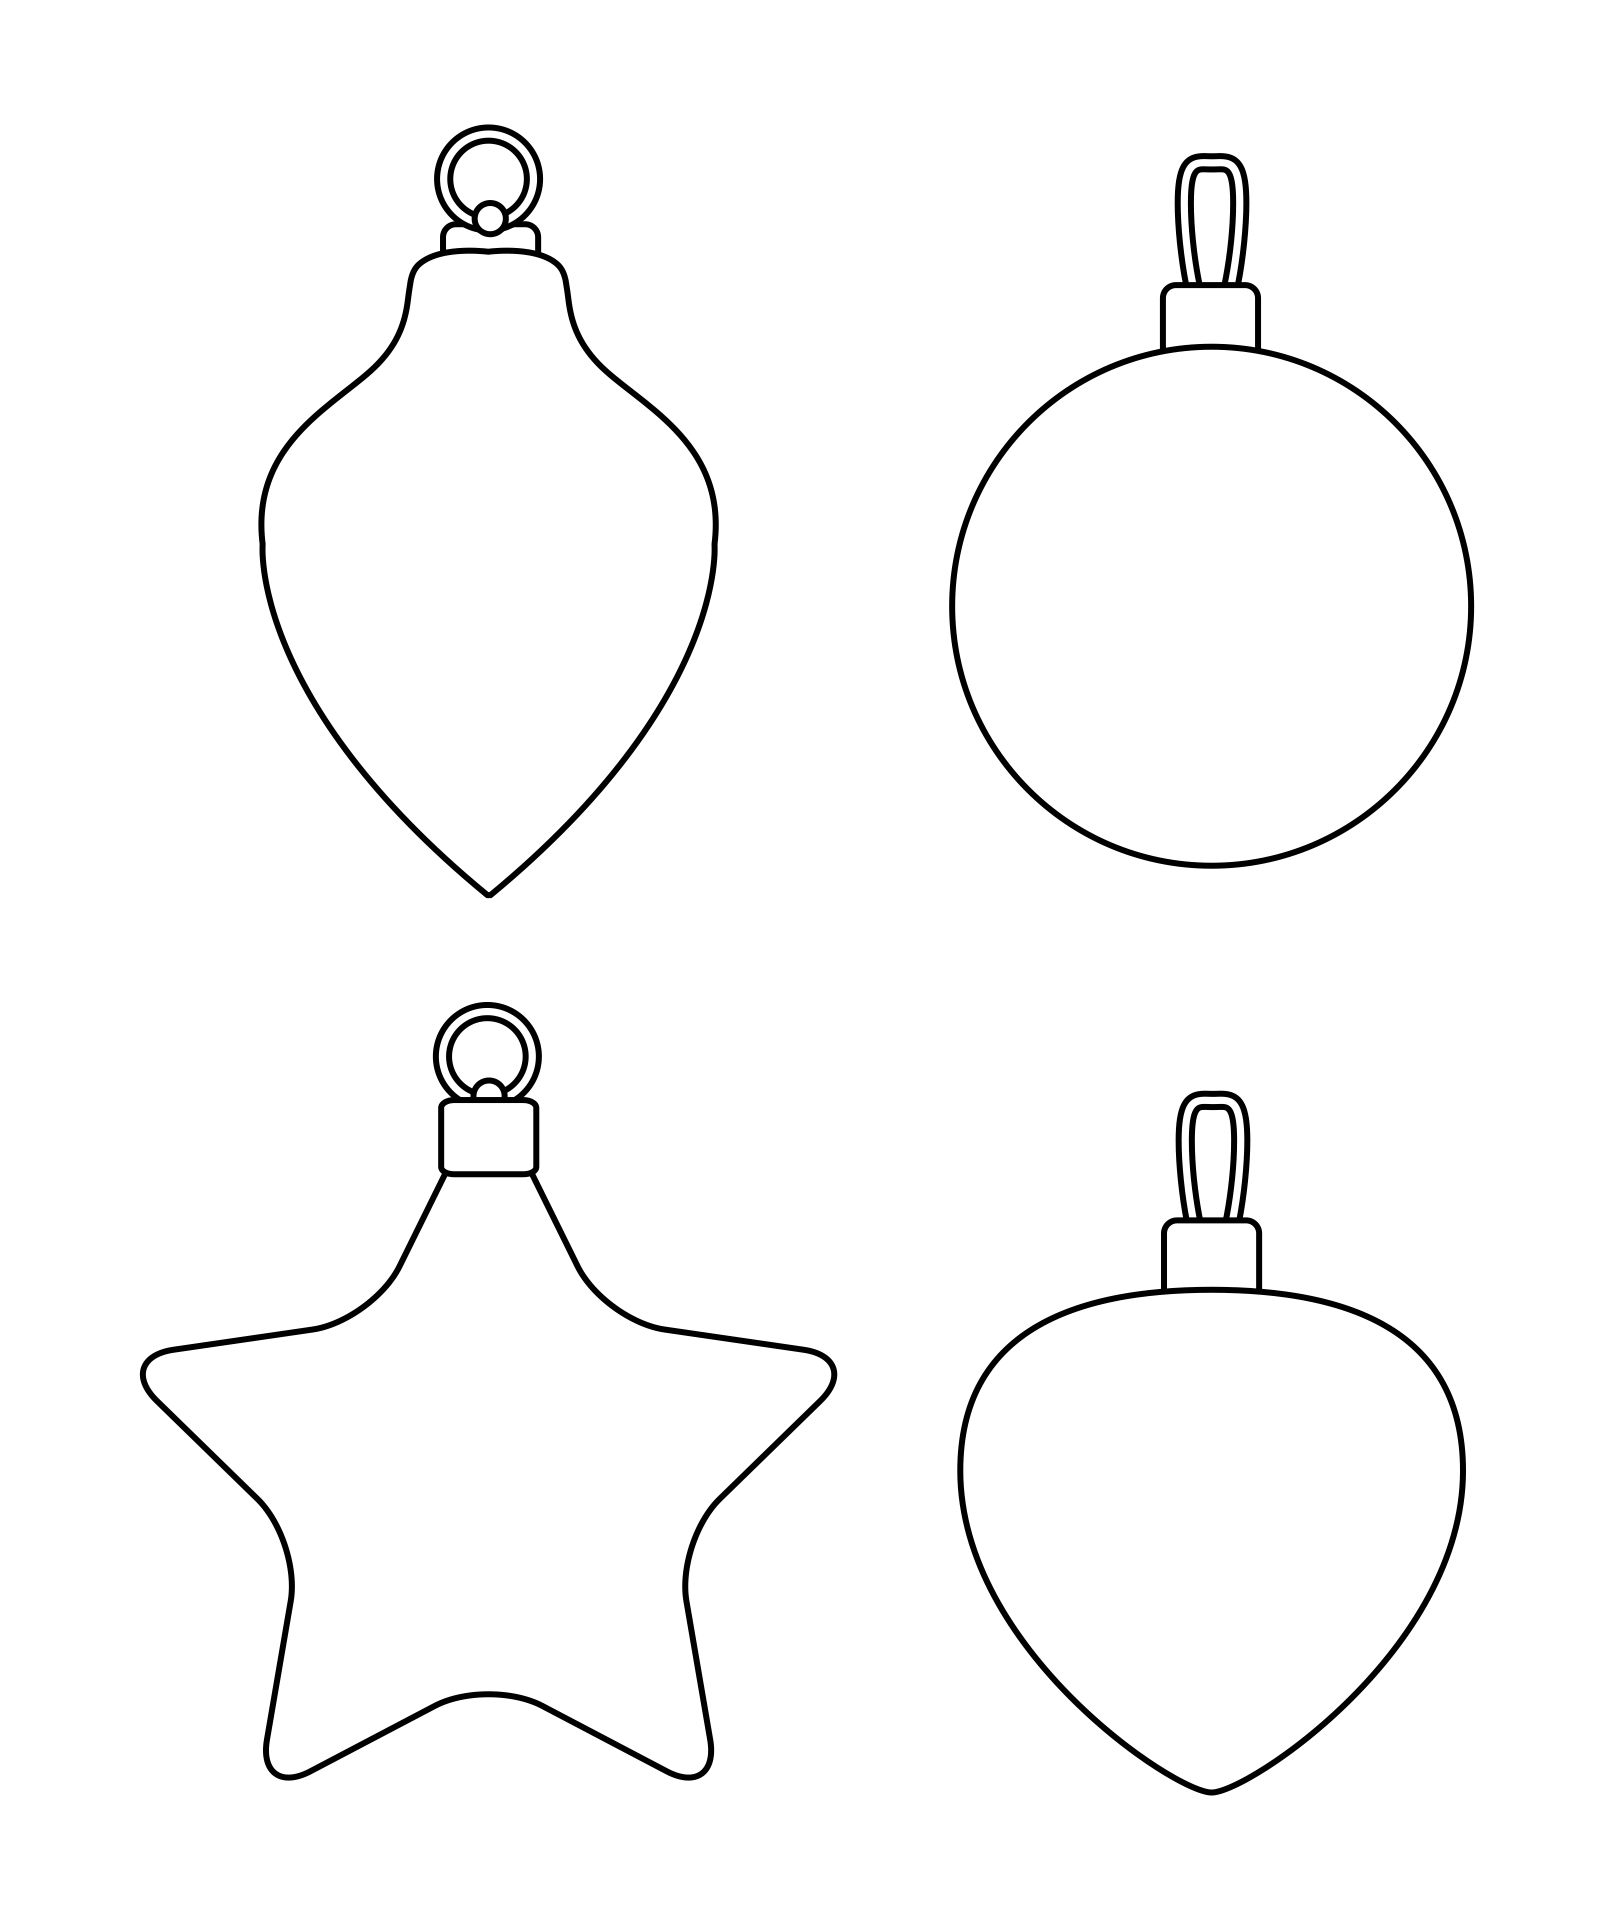 7 Best Images Of Printable Christmas Ornament Templates Christmas Ornament Templates